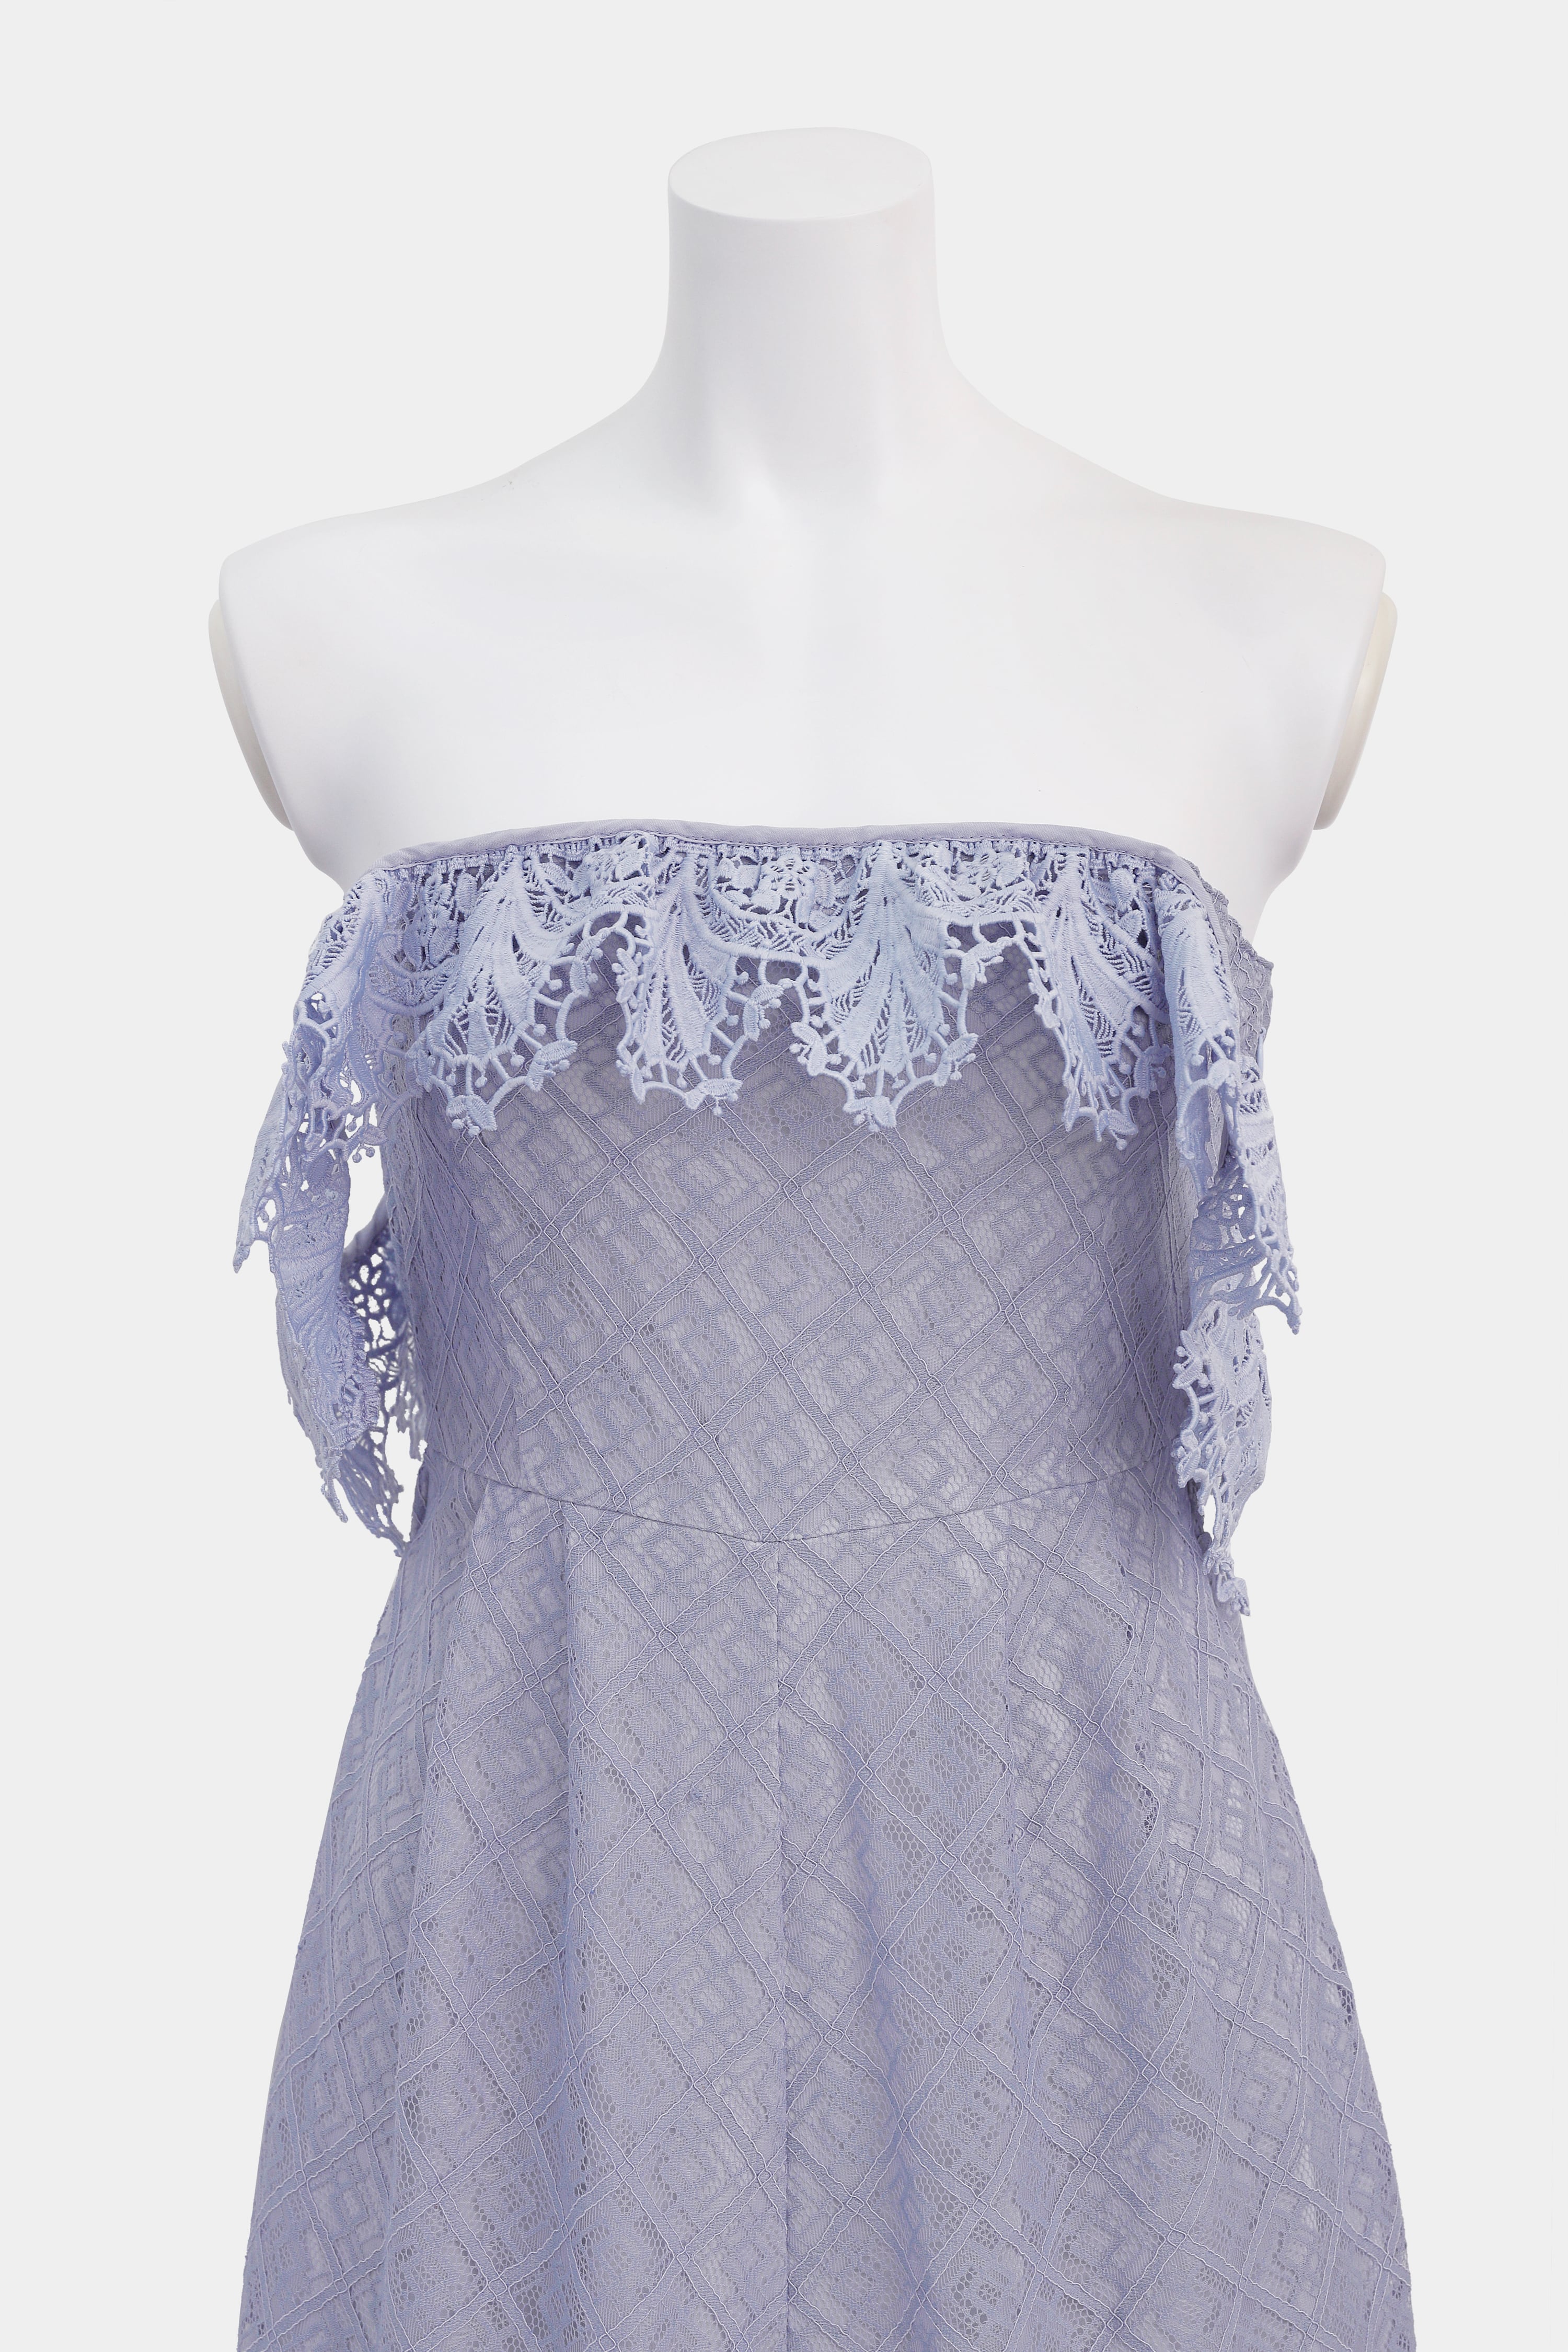 Scallop Lace All-In-One